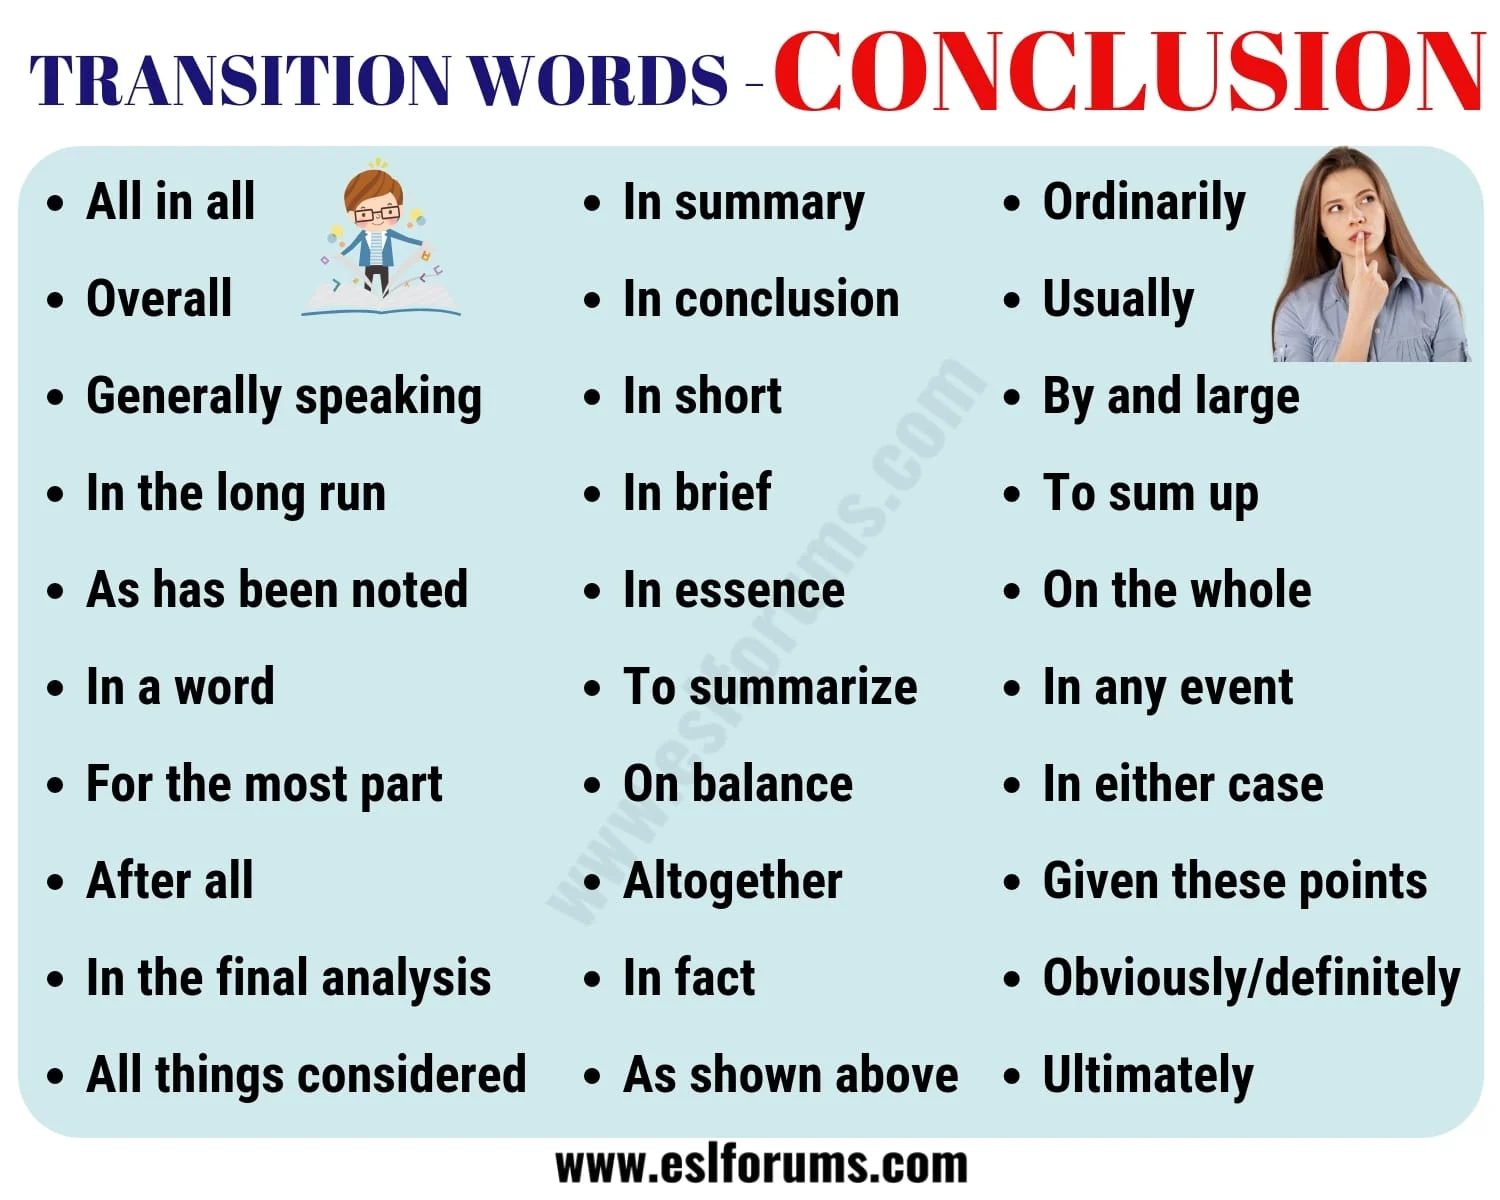 Good transition words for a conclusion